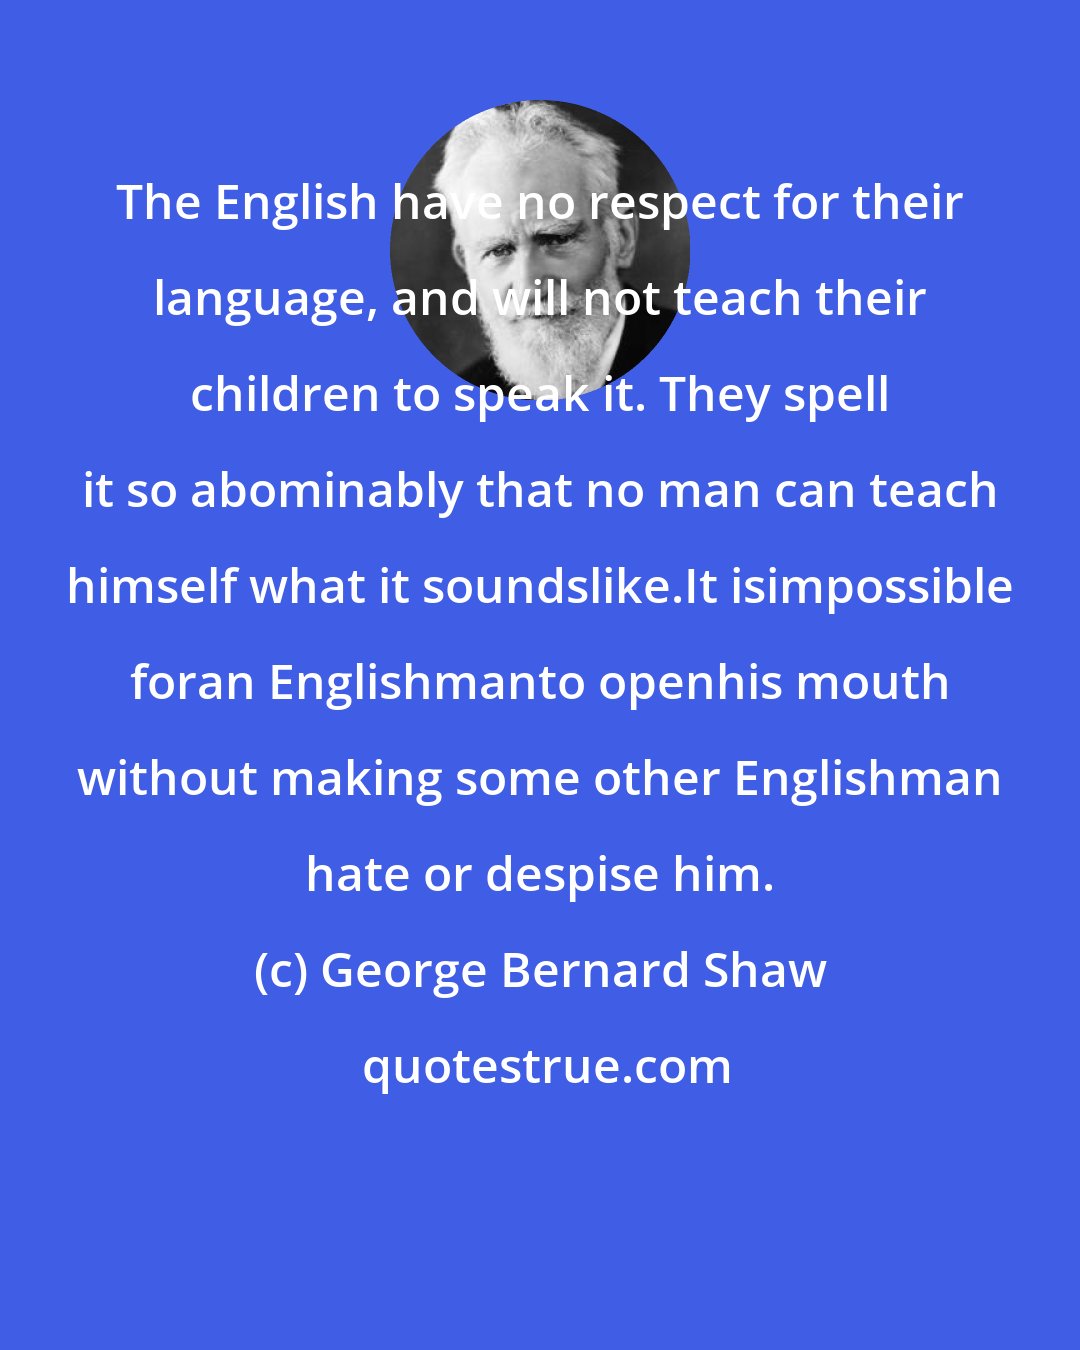 George Bernard Shaw: The English have no respect for their language, and will not teach their children to speak it. They spell it so abominably that no man can teach himself what it soundslike.It isimpossible foran Englishmanto openhis mouth without making some other Englishman hate or despise him.